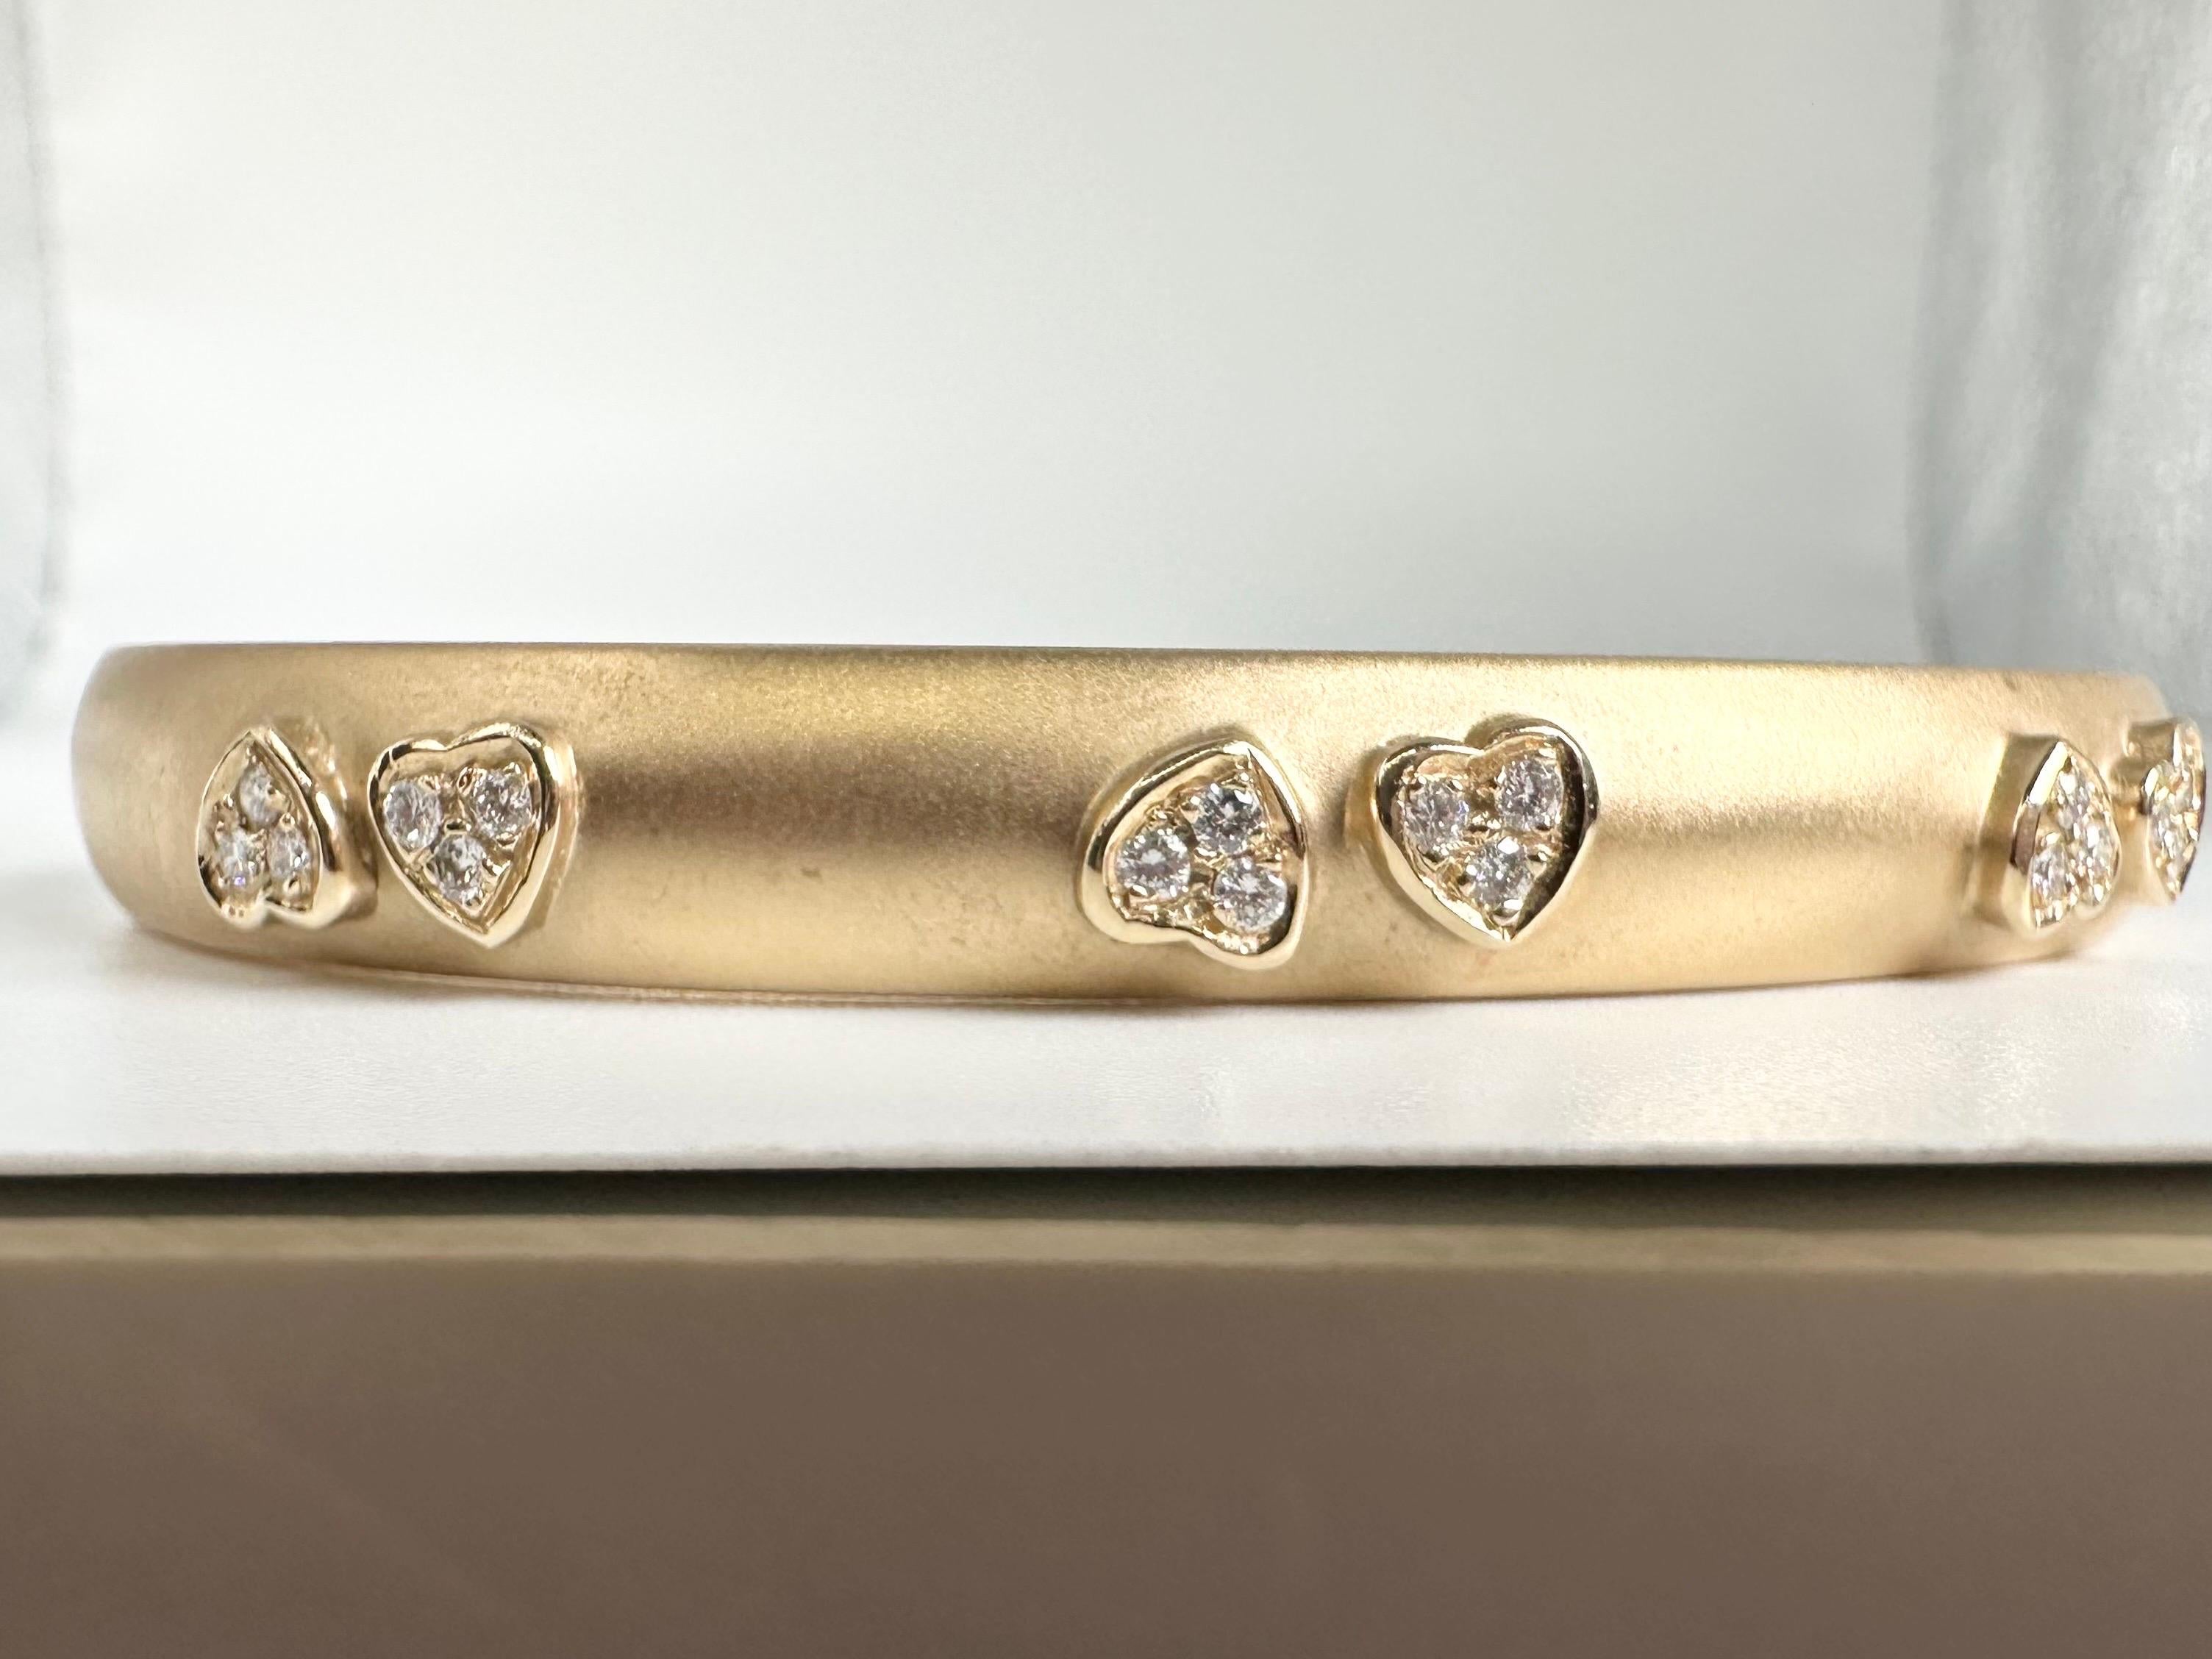 What a wonderful piece, stunning mate finish complimented by dazzling white diamonds inside little hearts, a beautiful classical bangle with a substantial weight! A well crafted lifetime jewelry piece indeed!

GOLD: 14KT gold
NATURAL